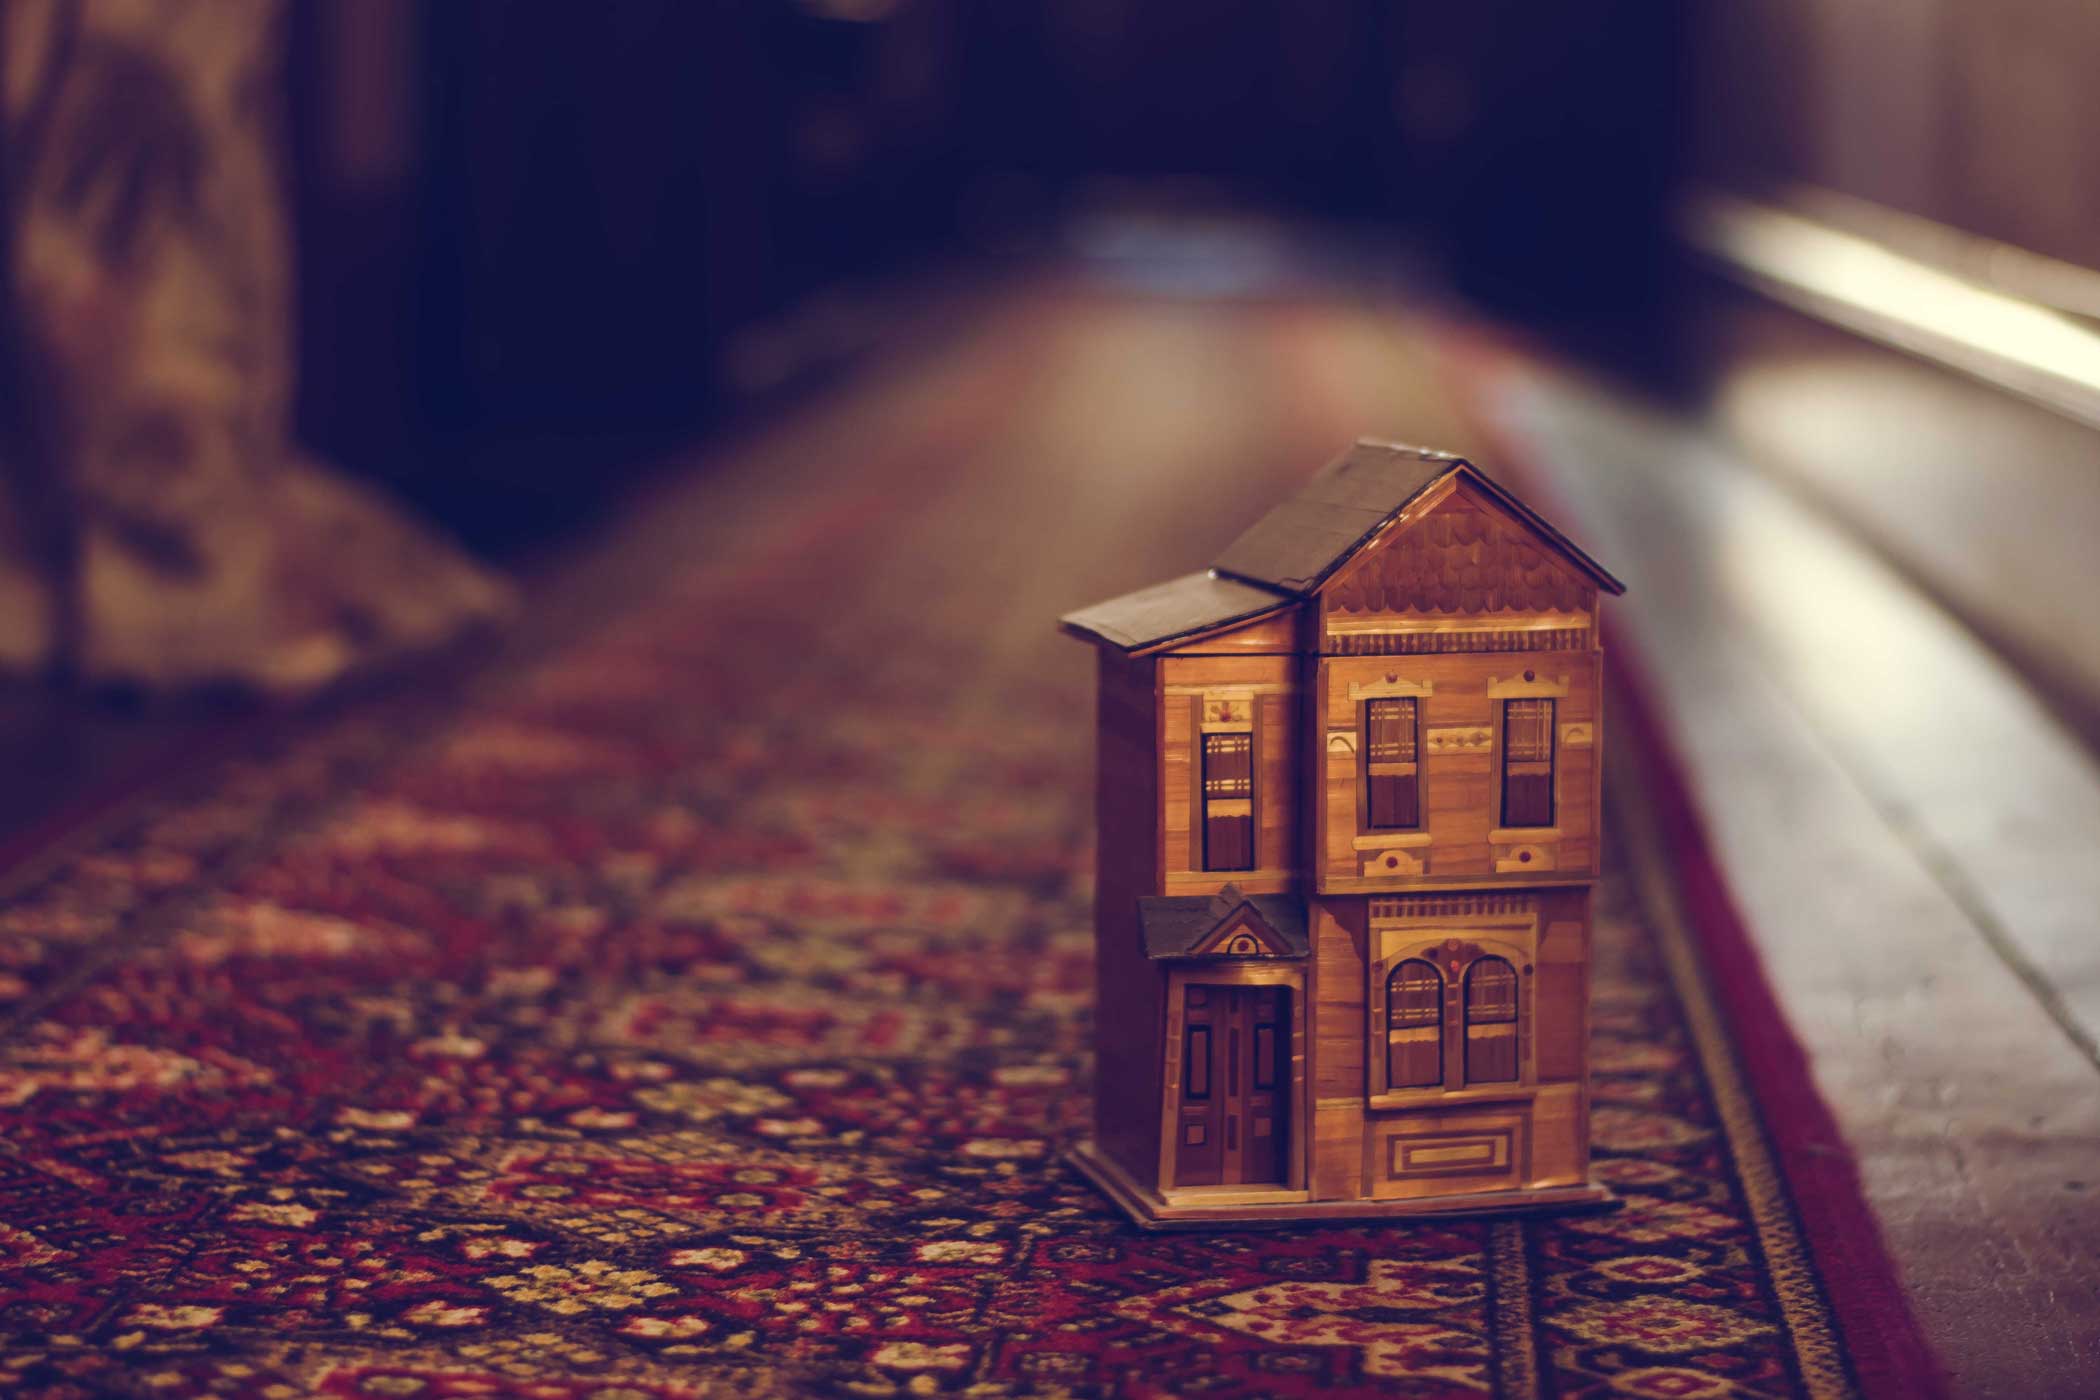 A close-up of a small model of a wood-framed town house sitting on a red patterned carpet on top of wooden floor boards.